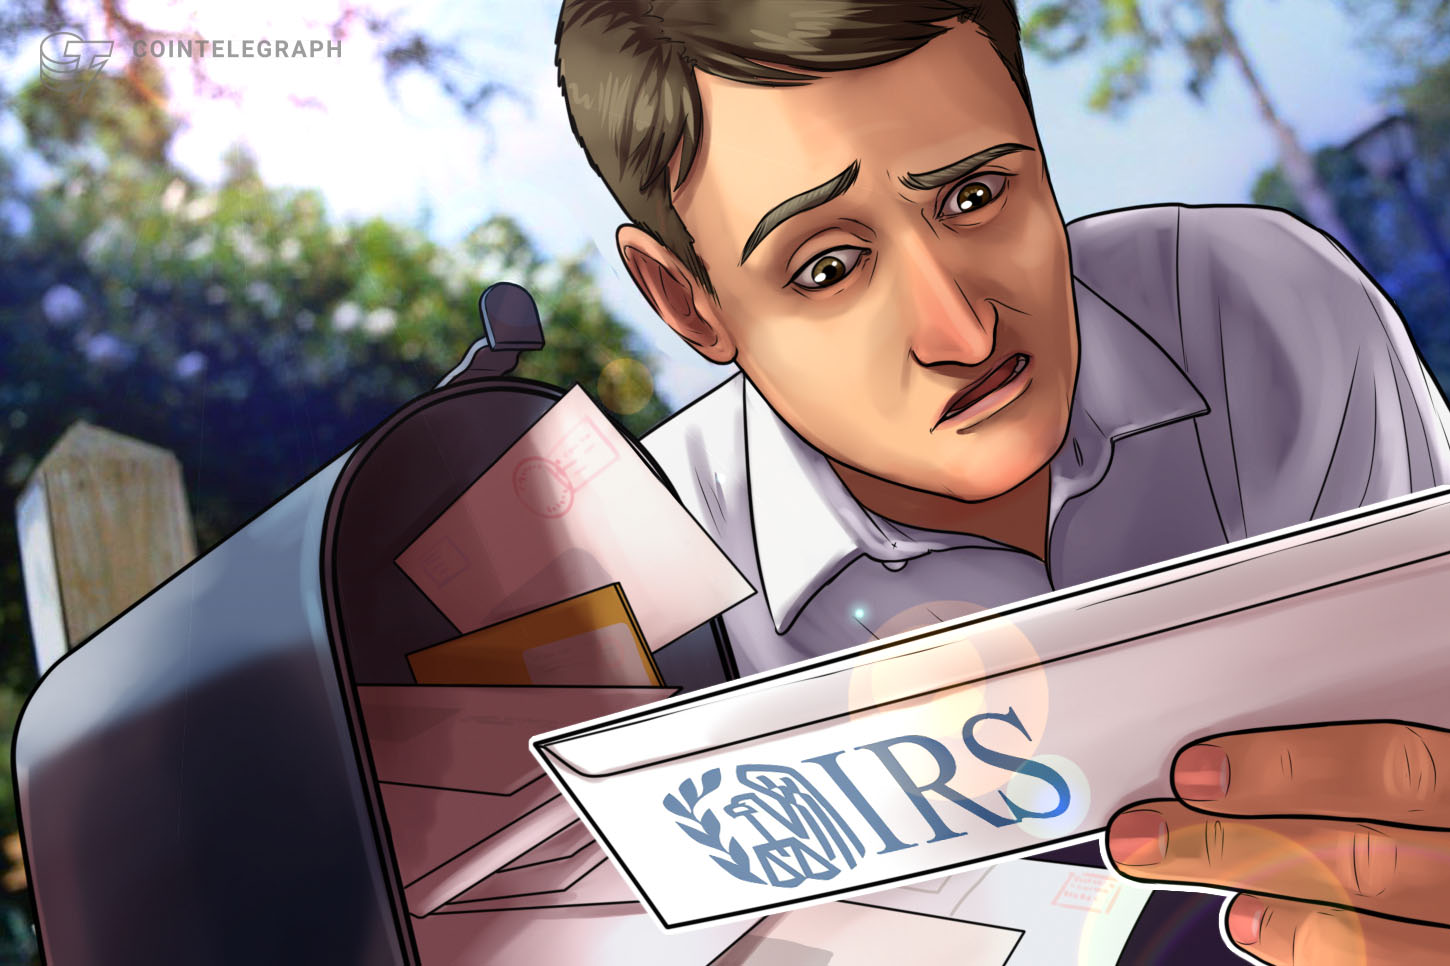 U.S. legislation agency says IRS is coming after Coinbase customers who evade taxes